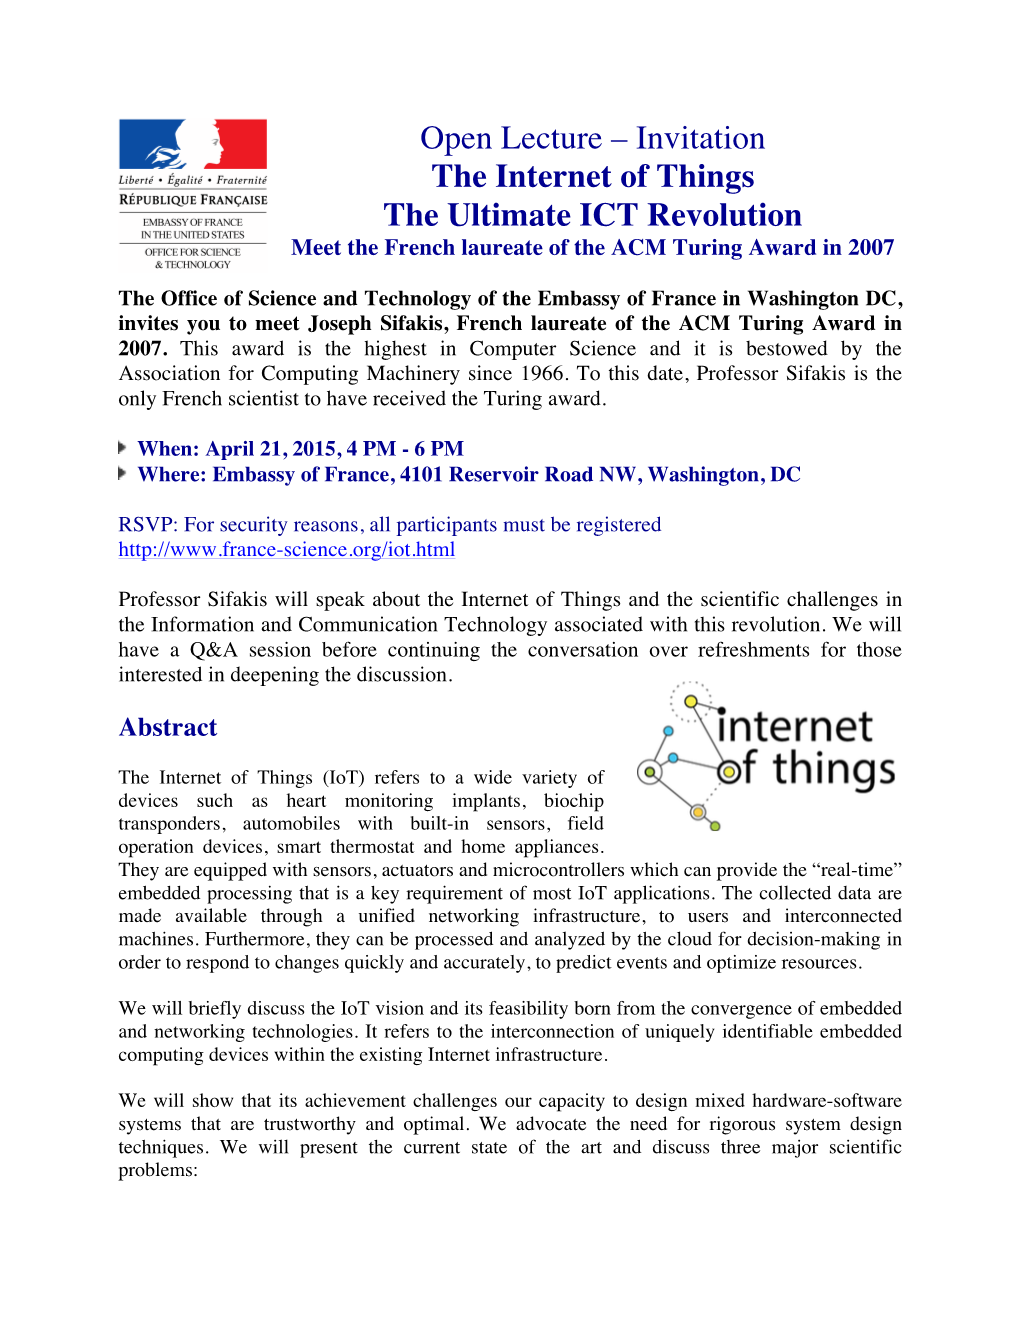 Open Lecture – Invitation the Internet of Things the Ultimate ICT Revolution Meet the French Laureate of the ACM Turing Award in 2007